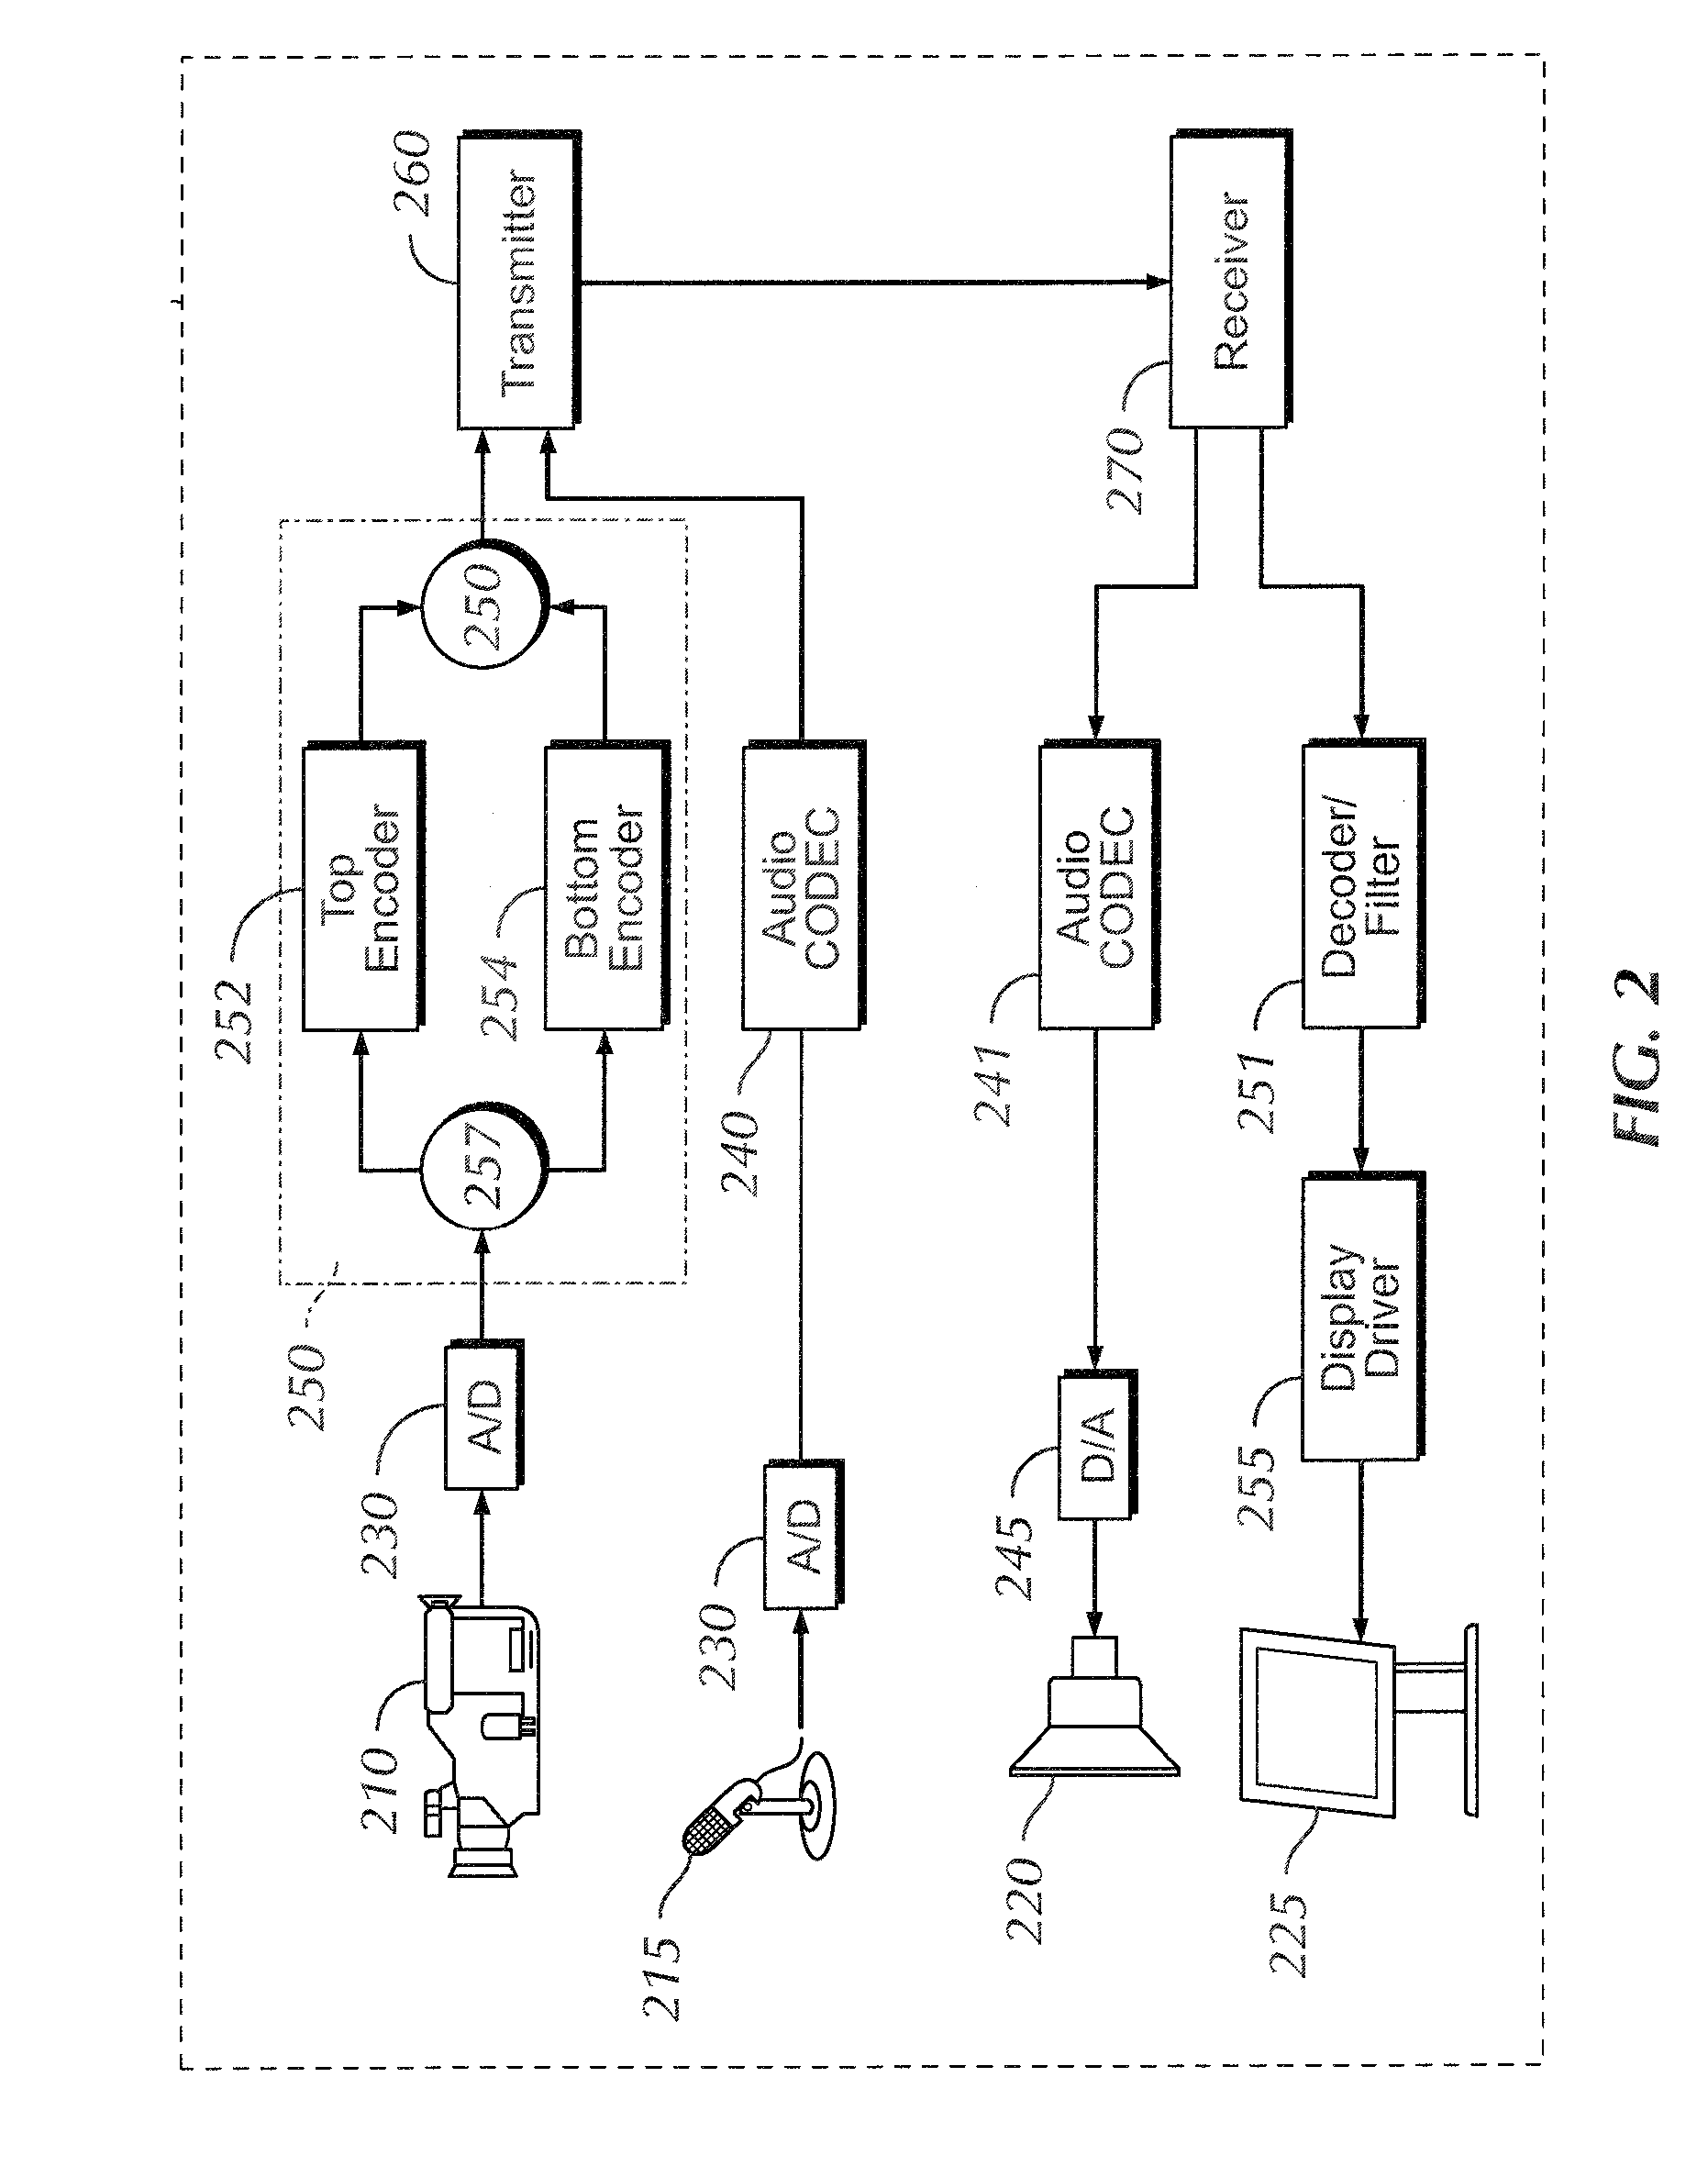 System and method for decreasing end-to-end delay during video conferencing session